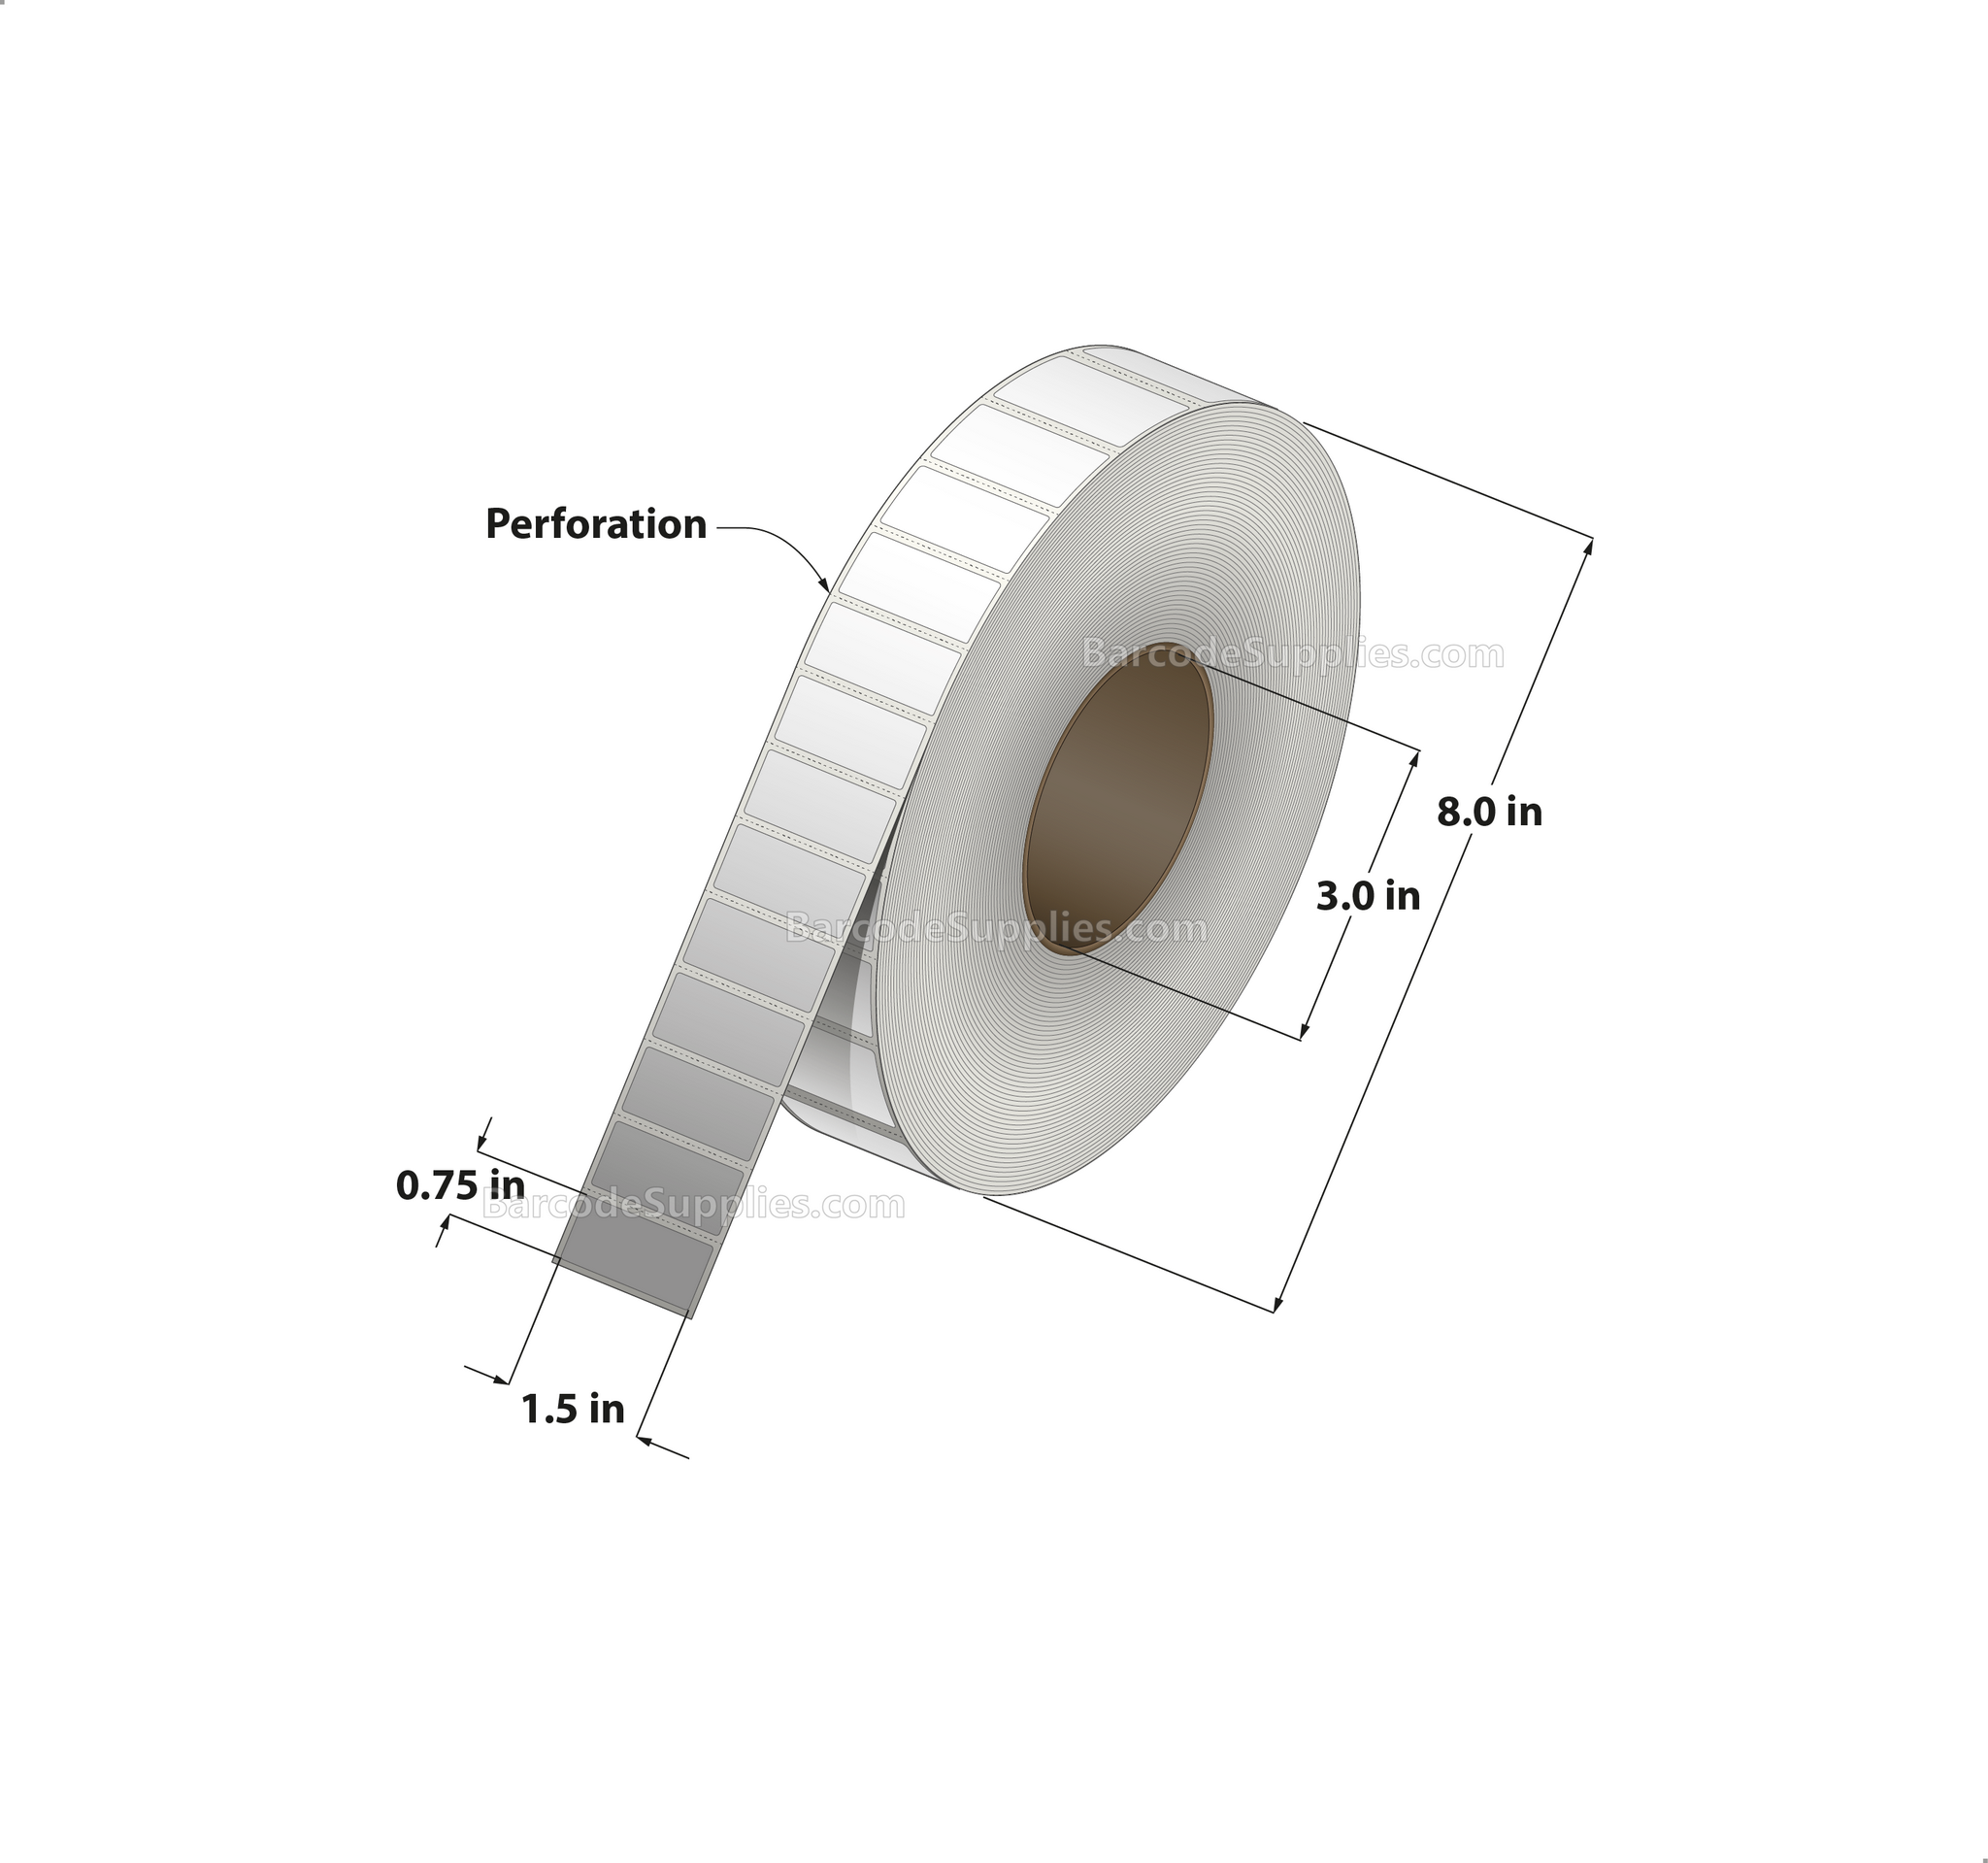 1.5 x 0.75 Thermal Transfer White Labels With Permanent Adhesive - Perforated - 7500 Labels Per Roll - Carton Of 8 Rolls - 60000 Labels Total - MPN: RT-15-075-7500-3